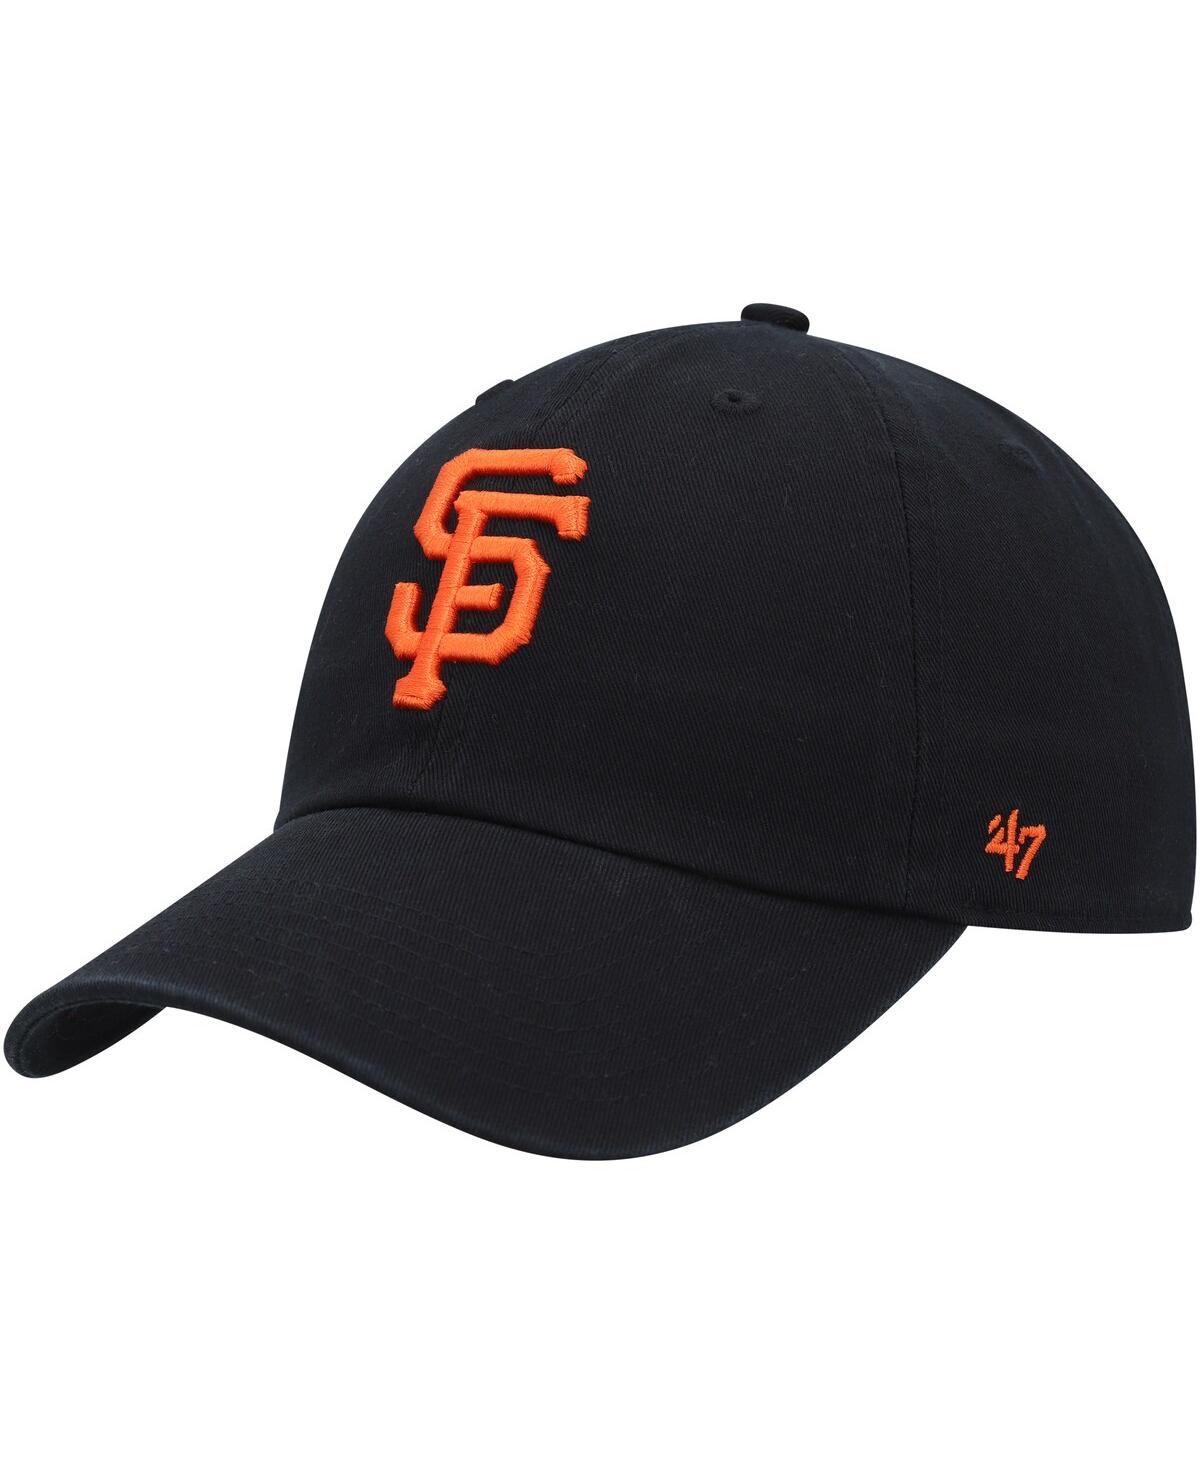 47 Brand Kids' Youth Boys And Girls ' Black San Francisco Giants Clean Up Adjustable Hat